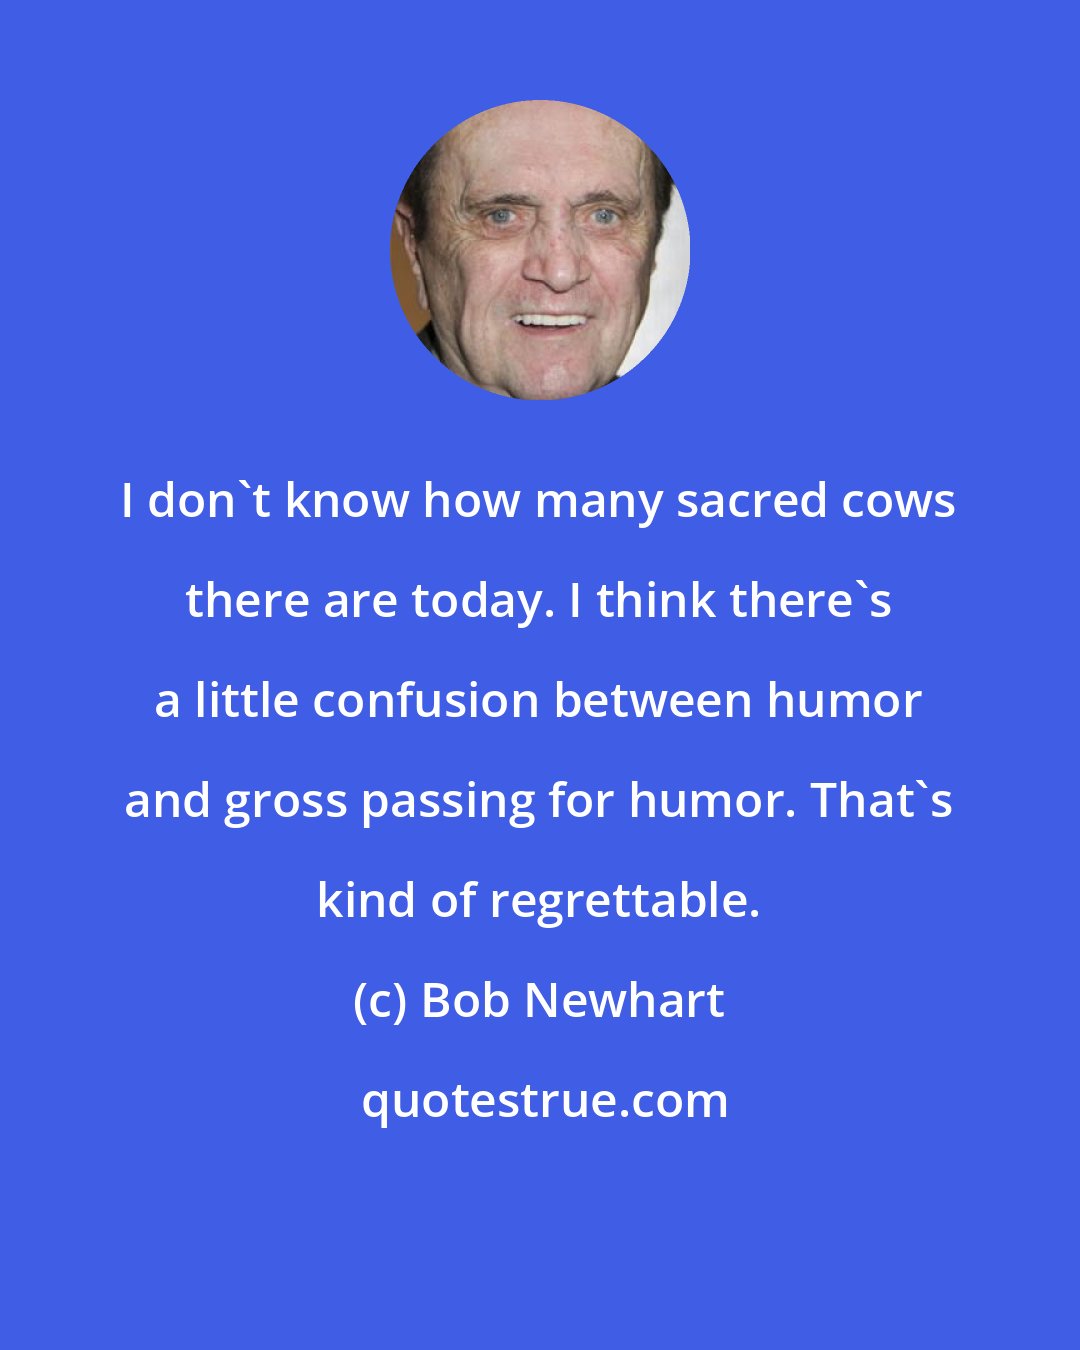 Bob Newhart: I don't know how many sacred cows there are today. I think there's a little confusion between humor and gross passing for humor. That's kind of regrettable.